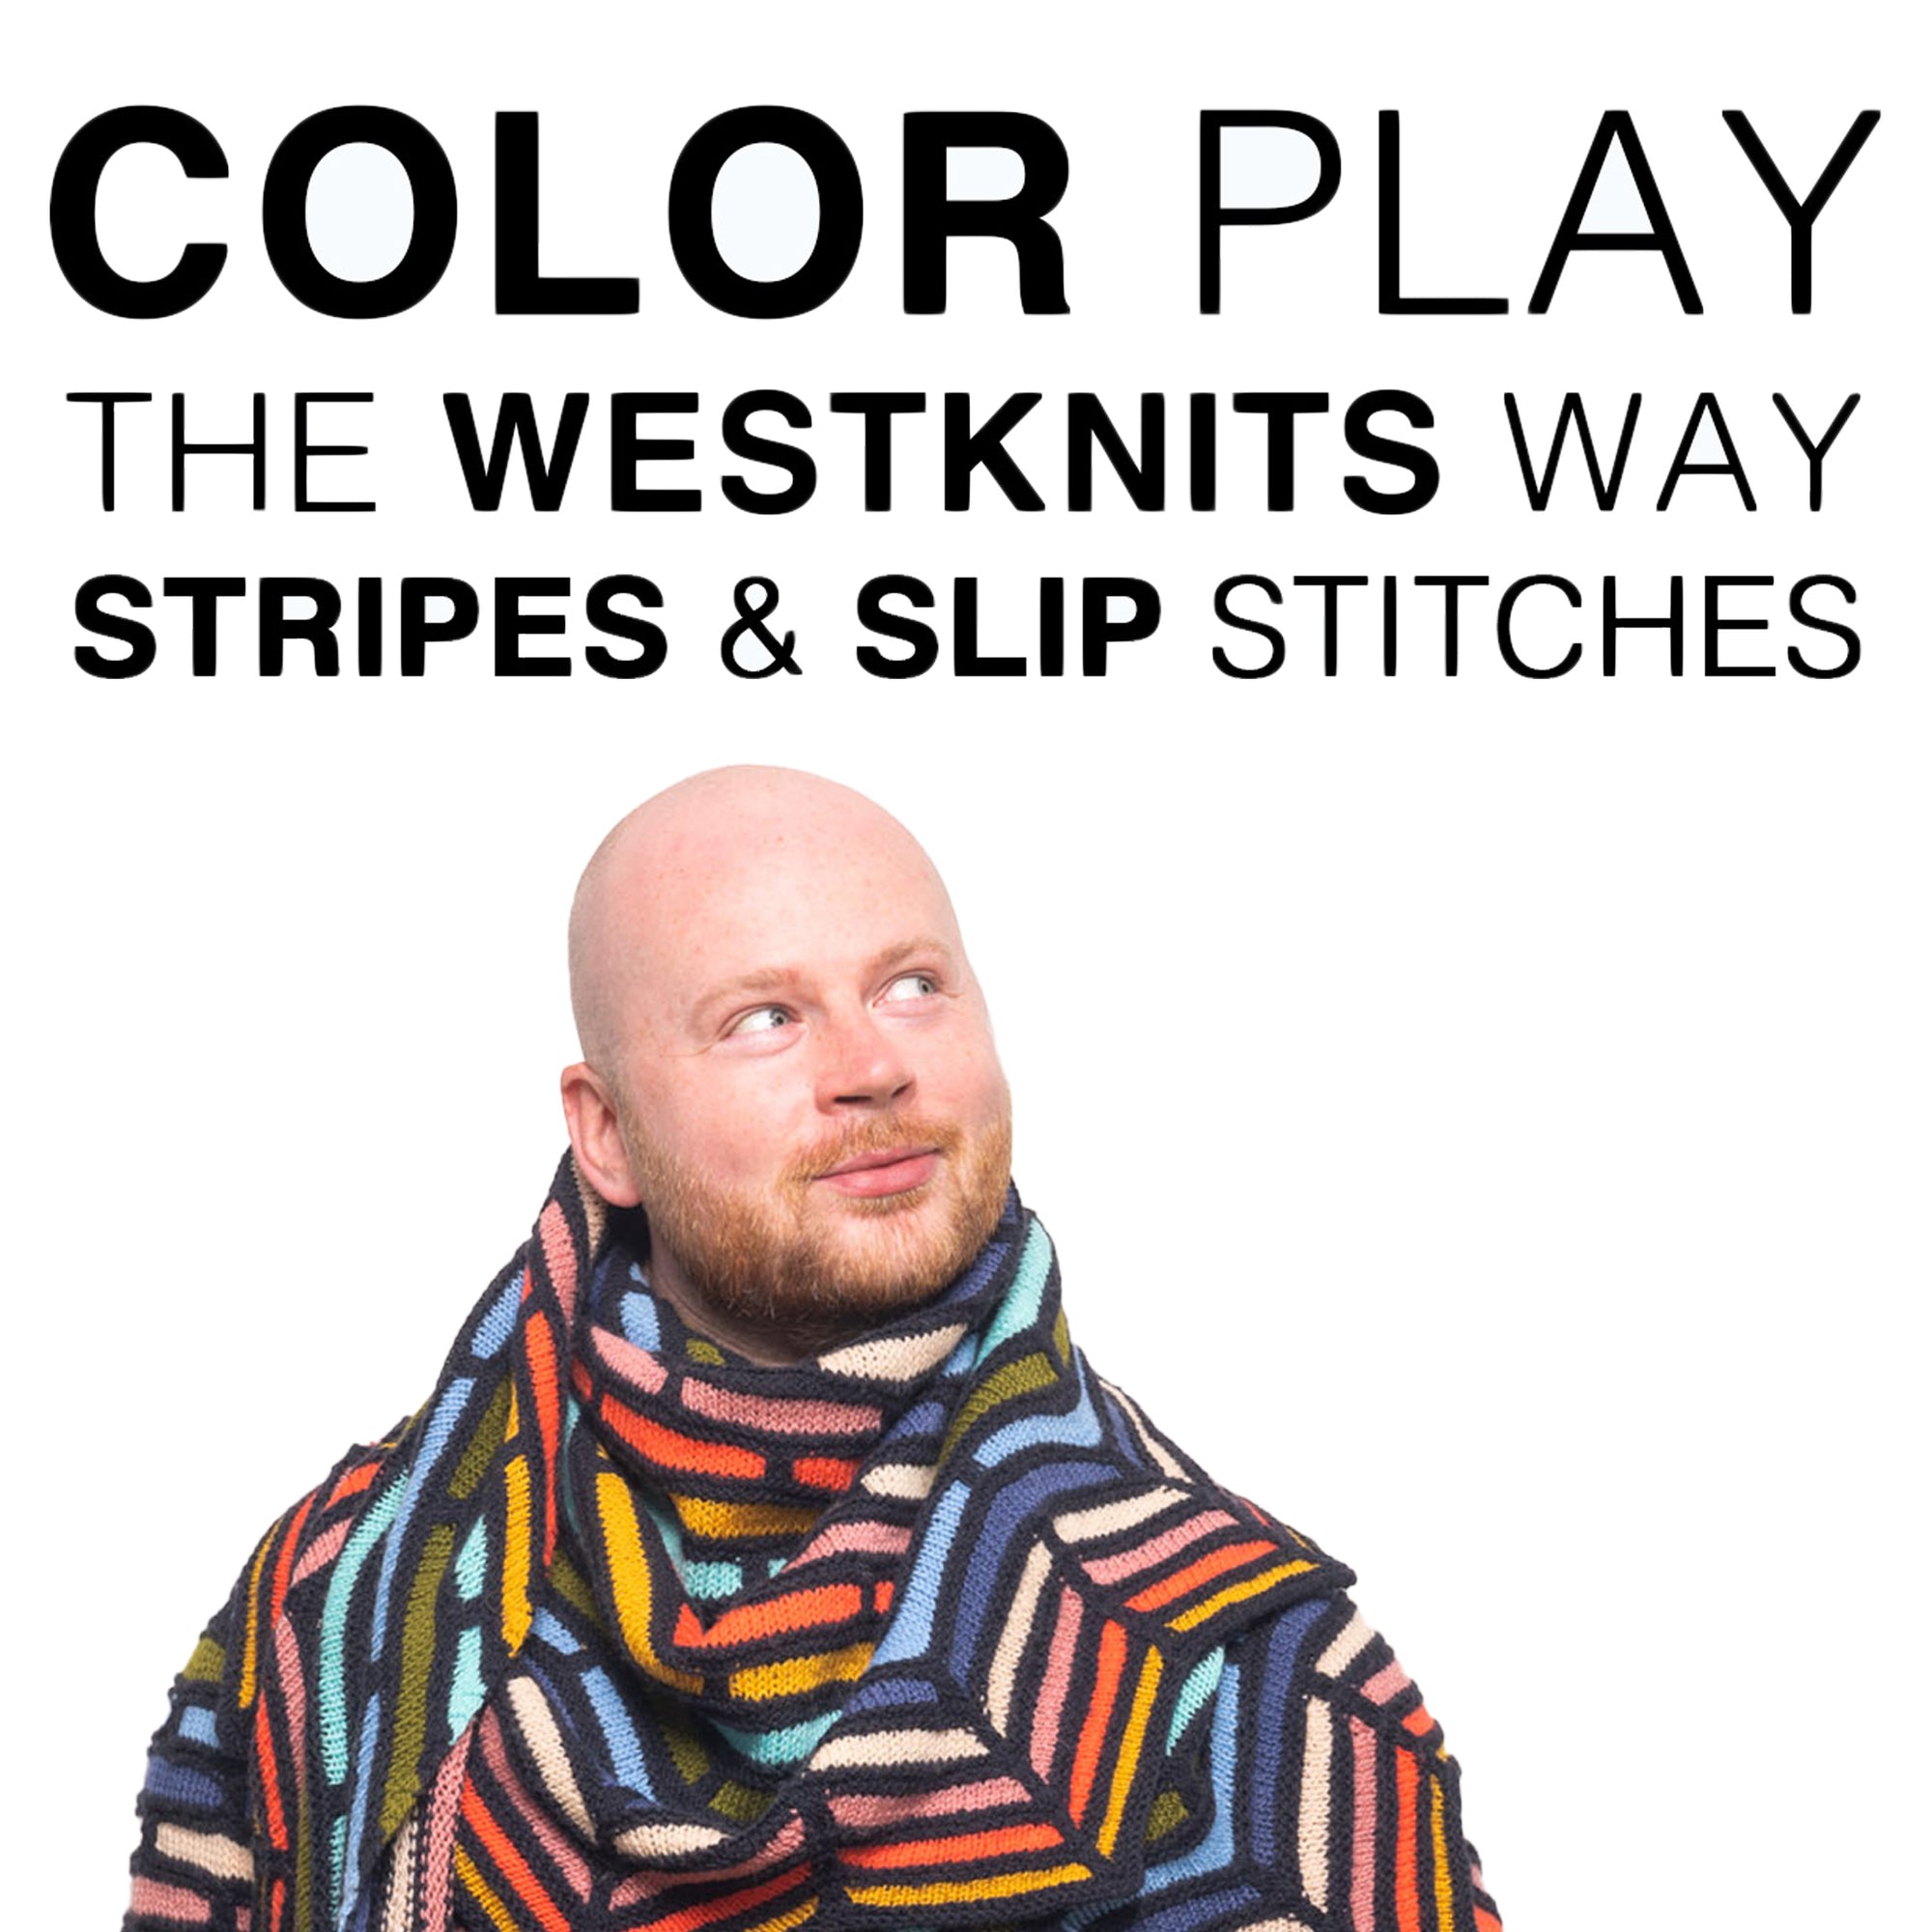 Colorplay the Westknits Way - Stripes & Slip Stitches